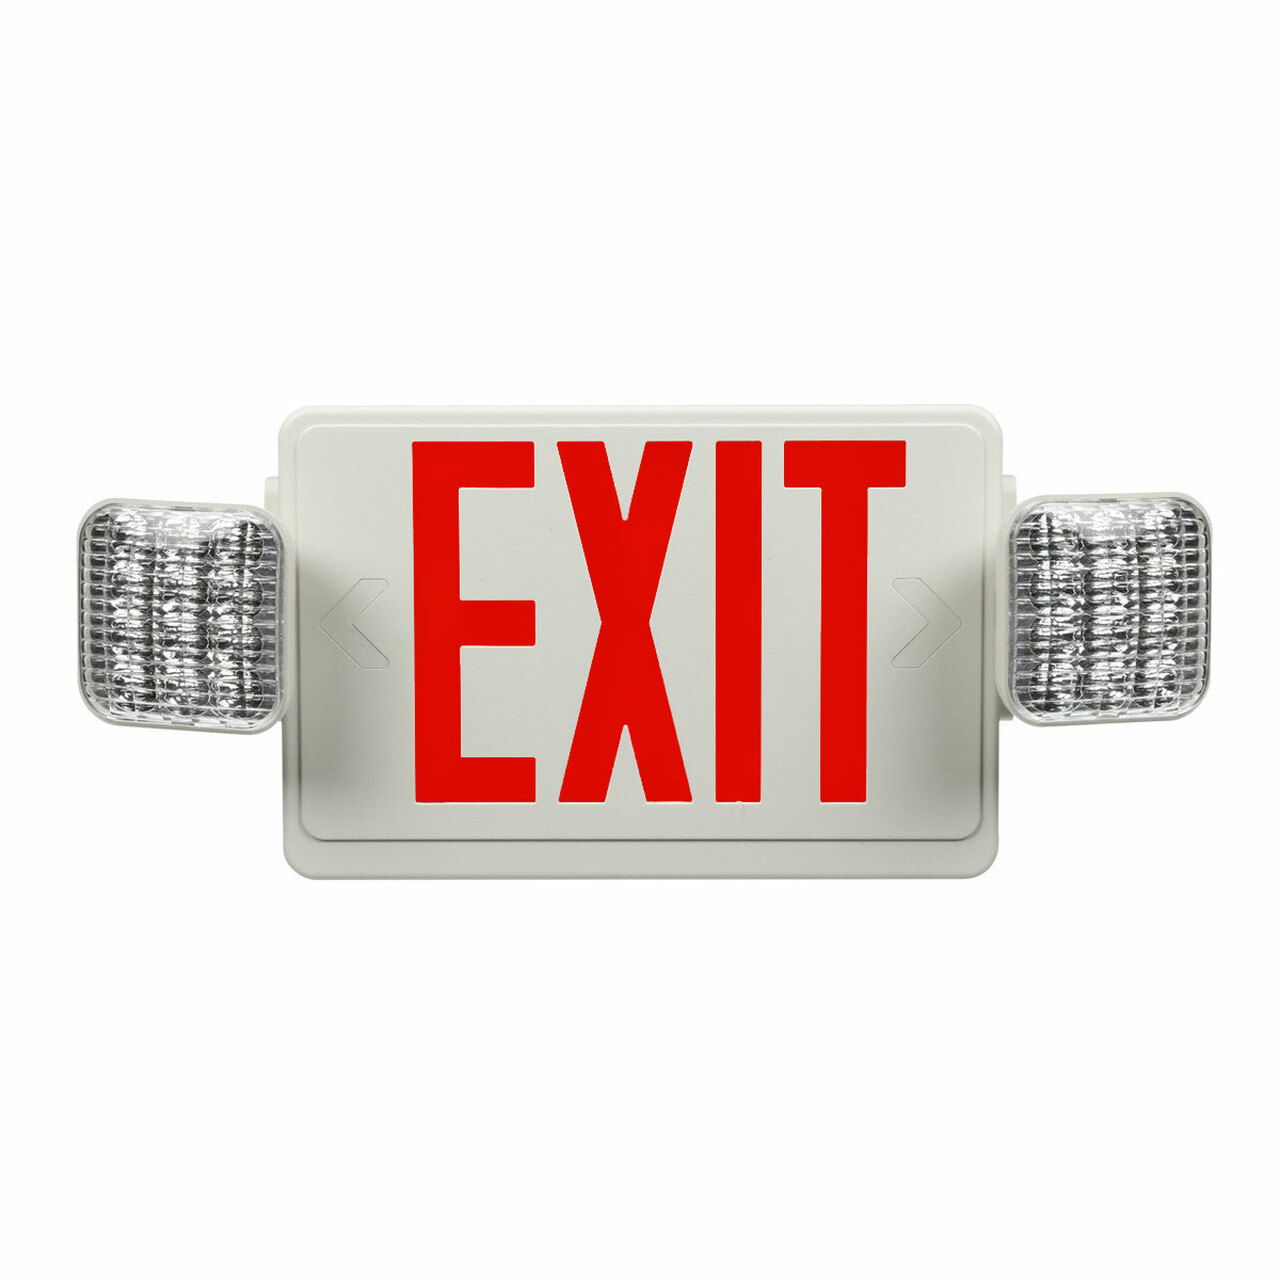 Indoor LED Emergency Light Exit Sign Lighting Standard Twin Square Head 6pcs 